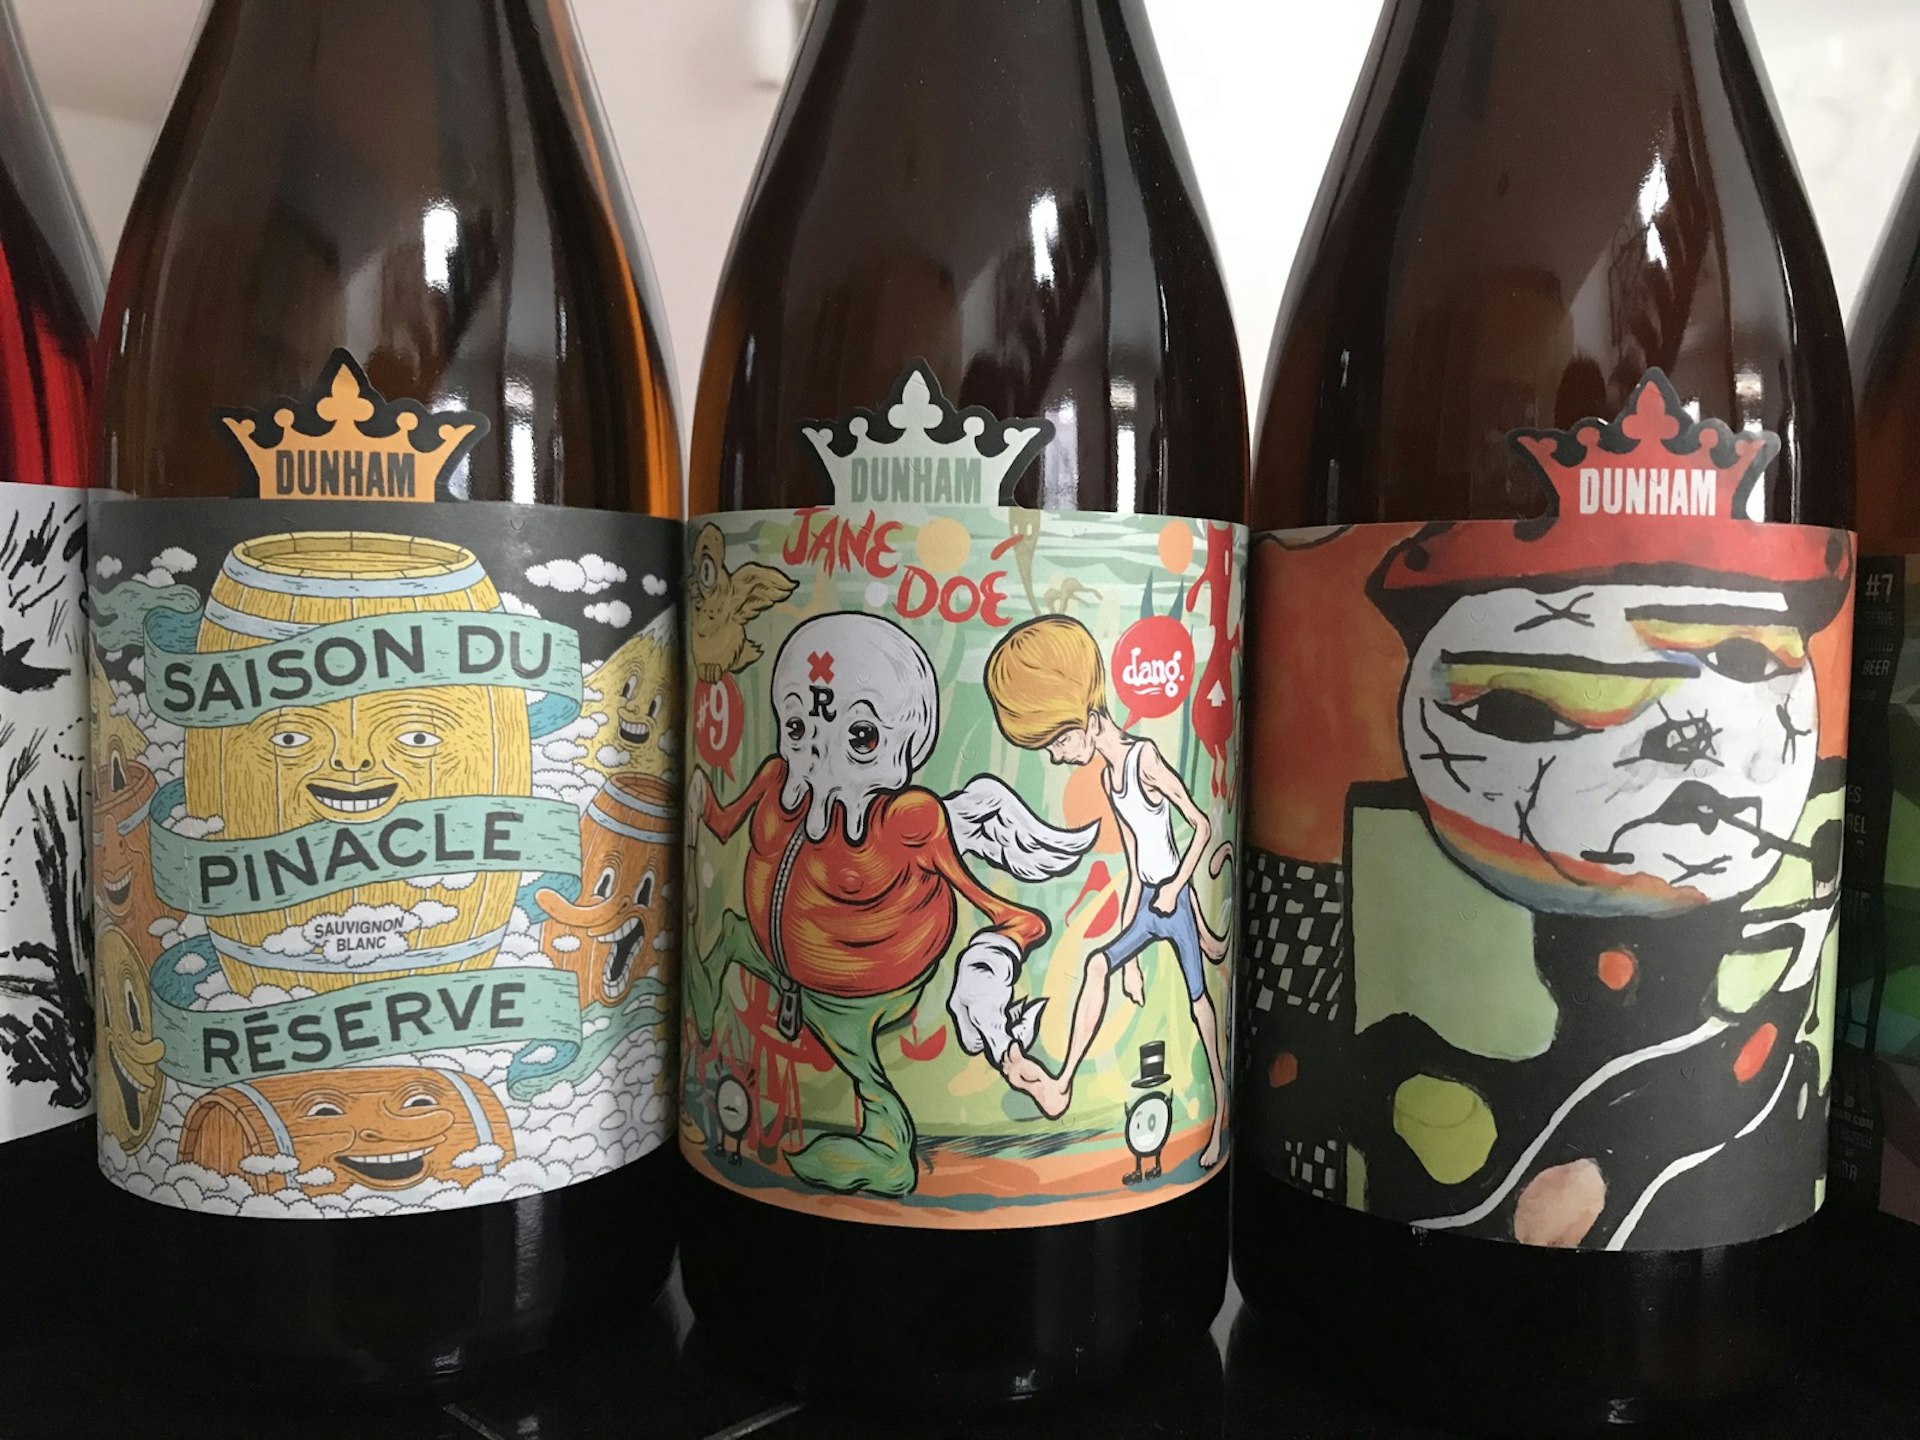 A row of beer bottles with bright, artistic labels